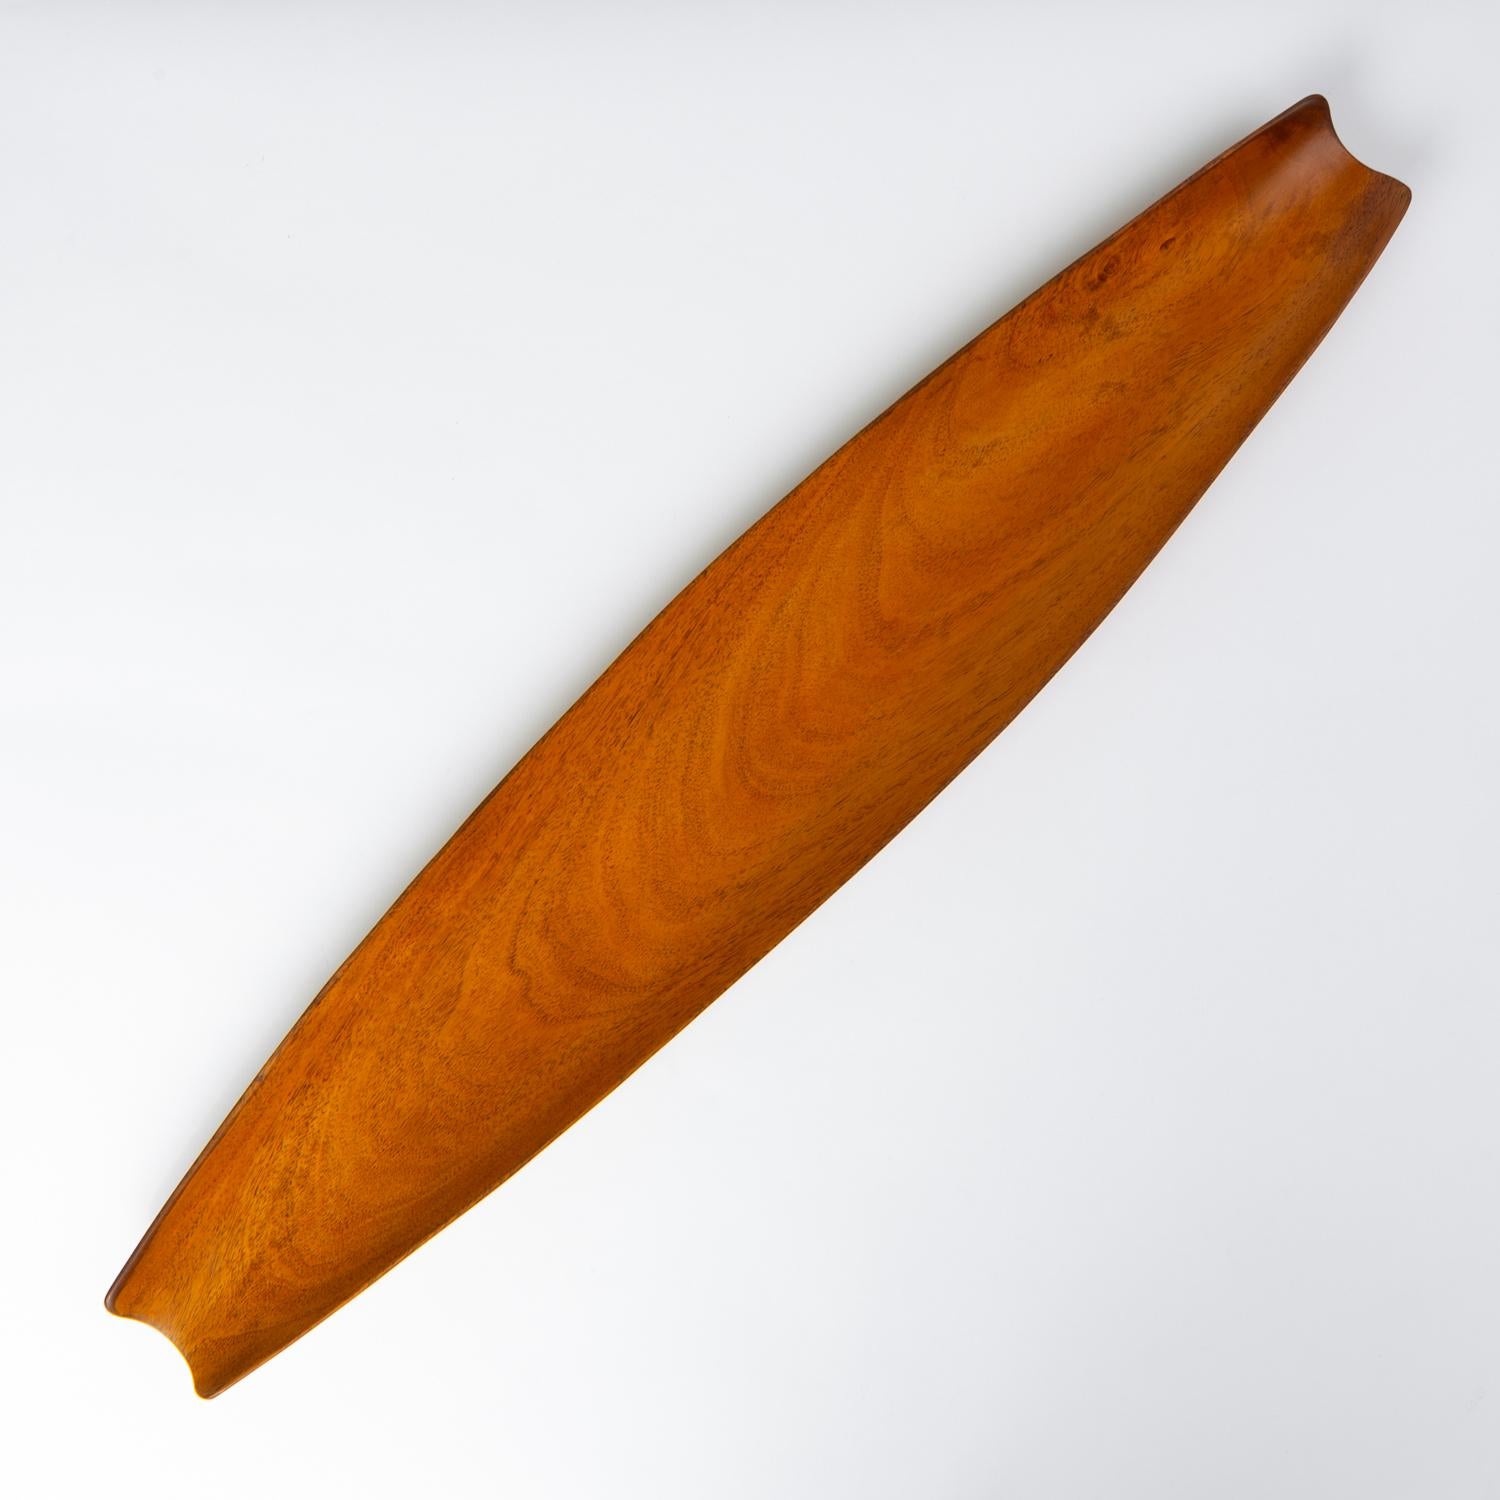 A long, curved wooden bowl from Haitian company, pantalcraft. Handmade on the island from local woods - in this case the material is Taverneau, also known as Caribbean Walnut or False Tamarind, a durable tropical hardwood with a golden hue. The bowl